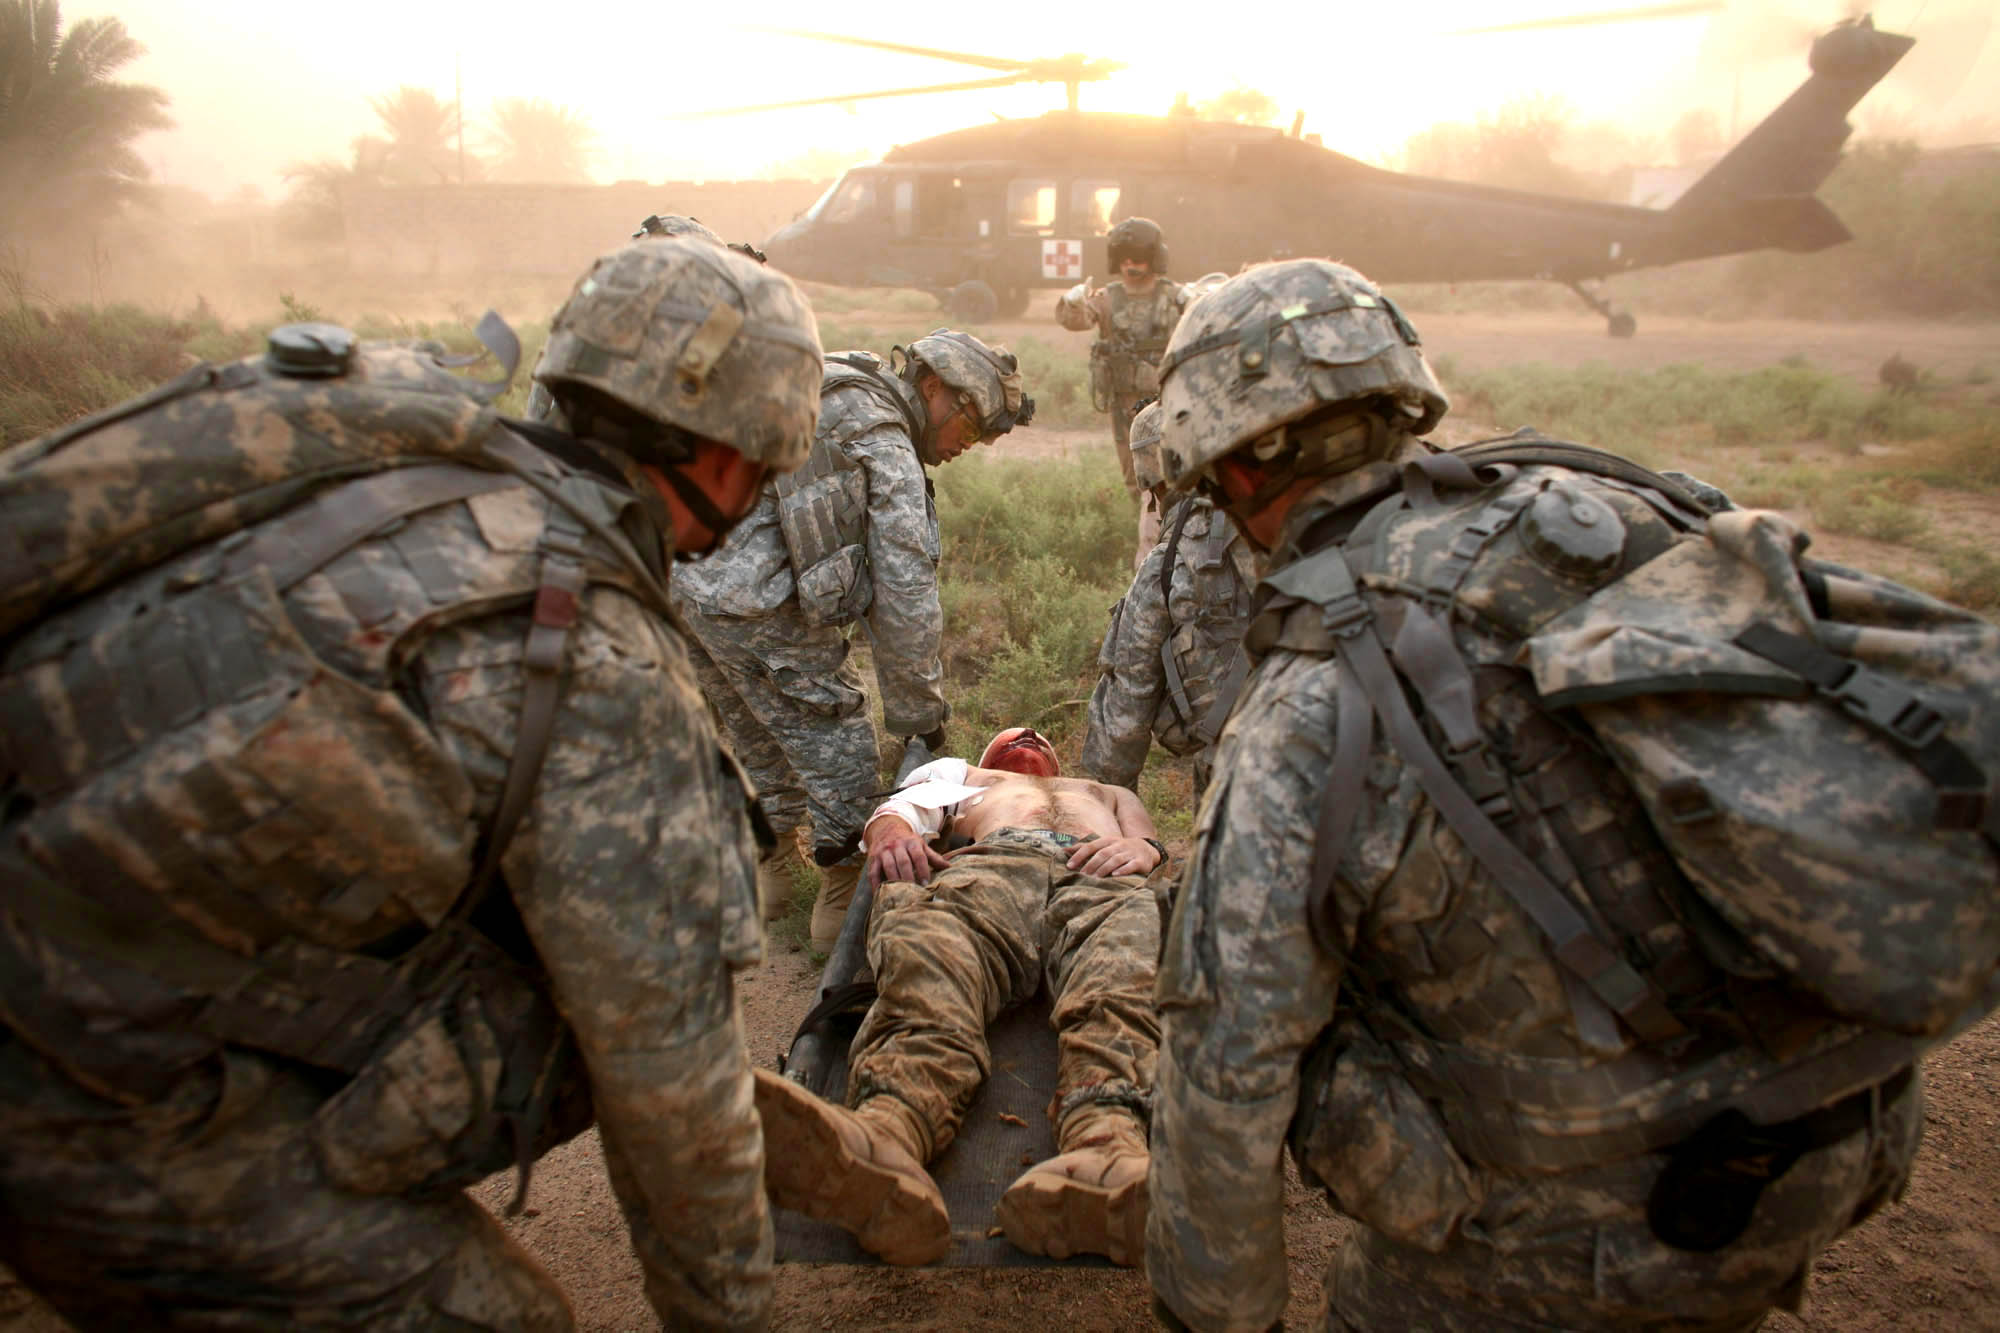 A wounded US soldier is carried to a helicopter (photo: Michael Kamber) 